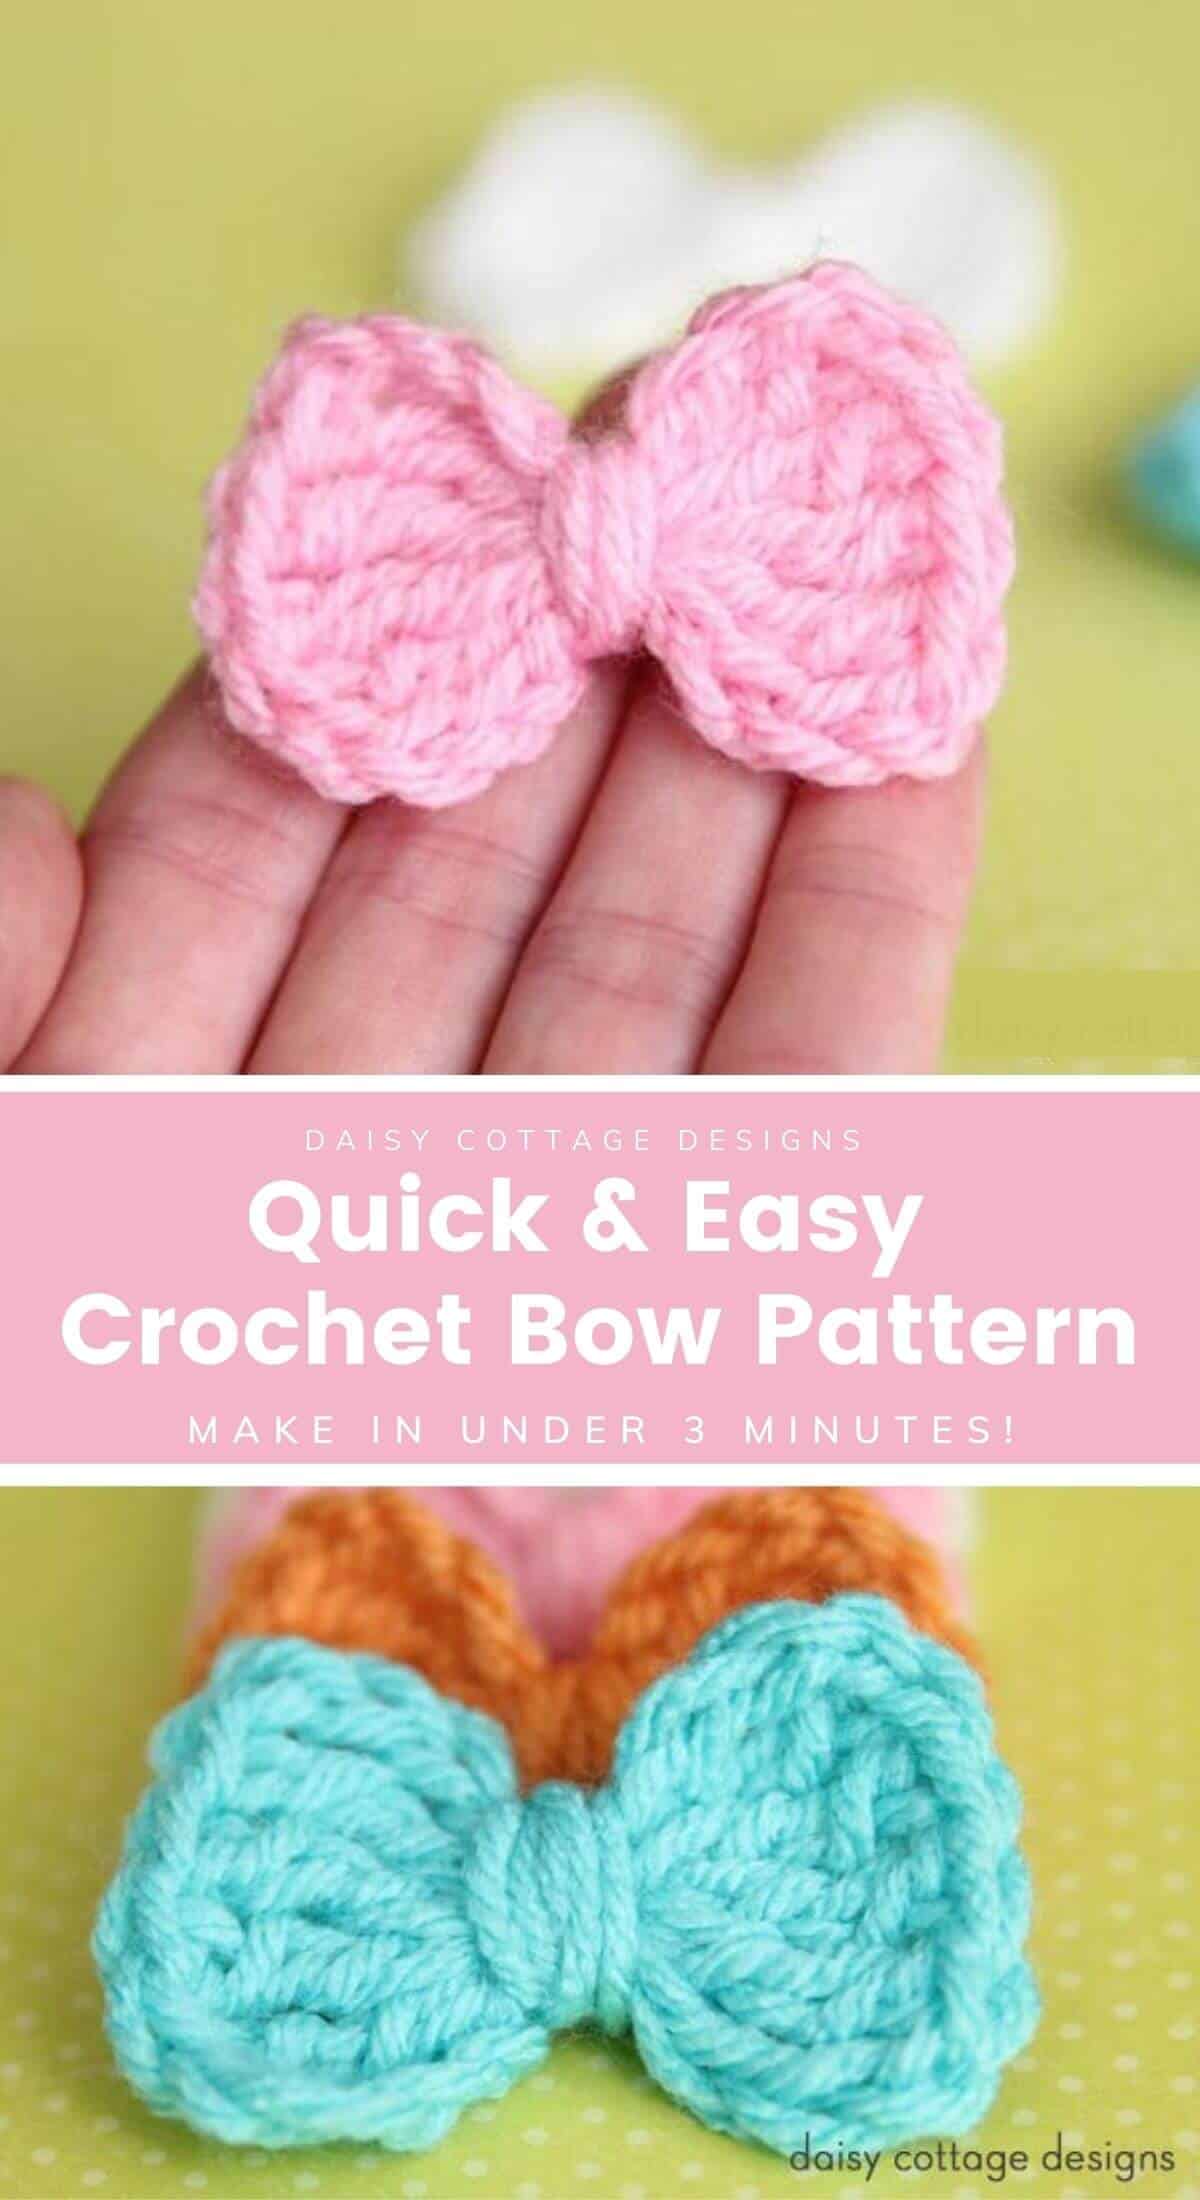 How to Make a Crochet Bow Pattern